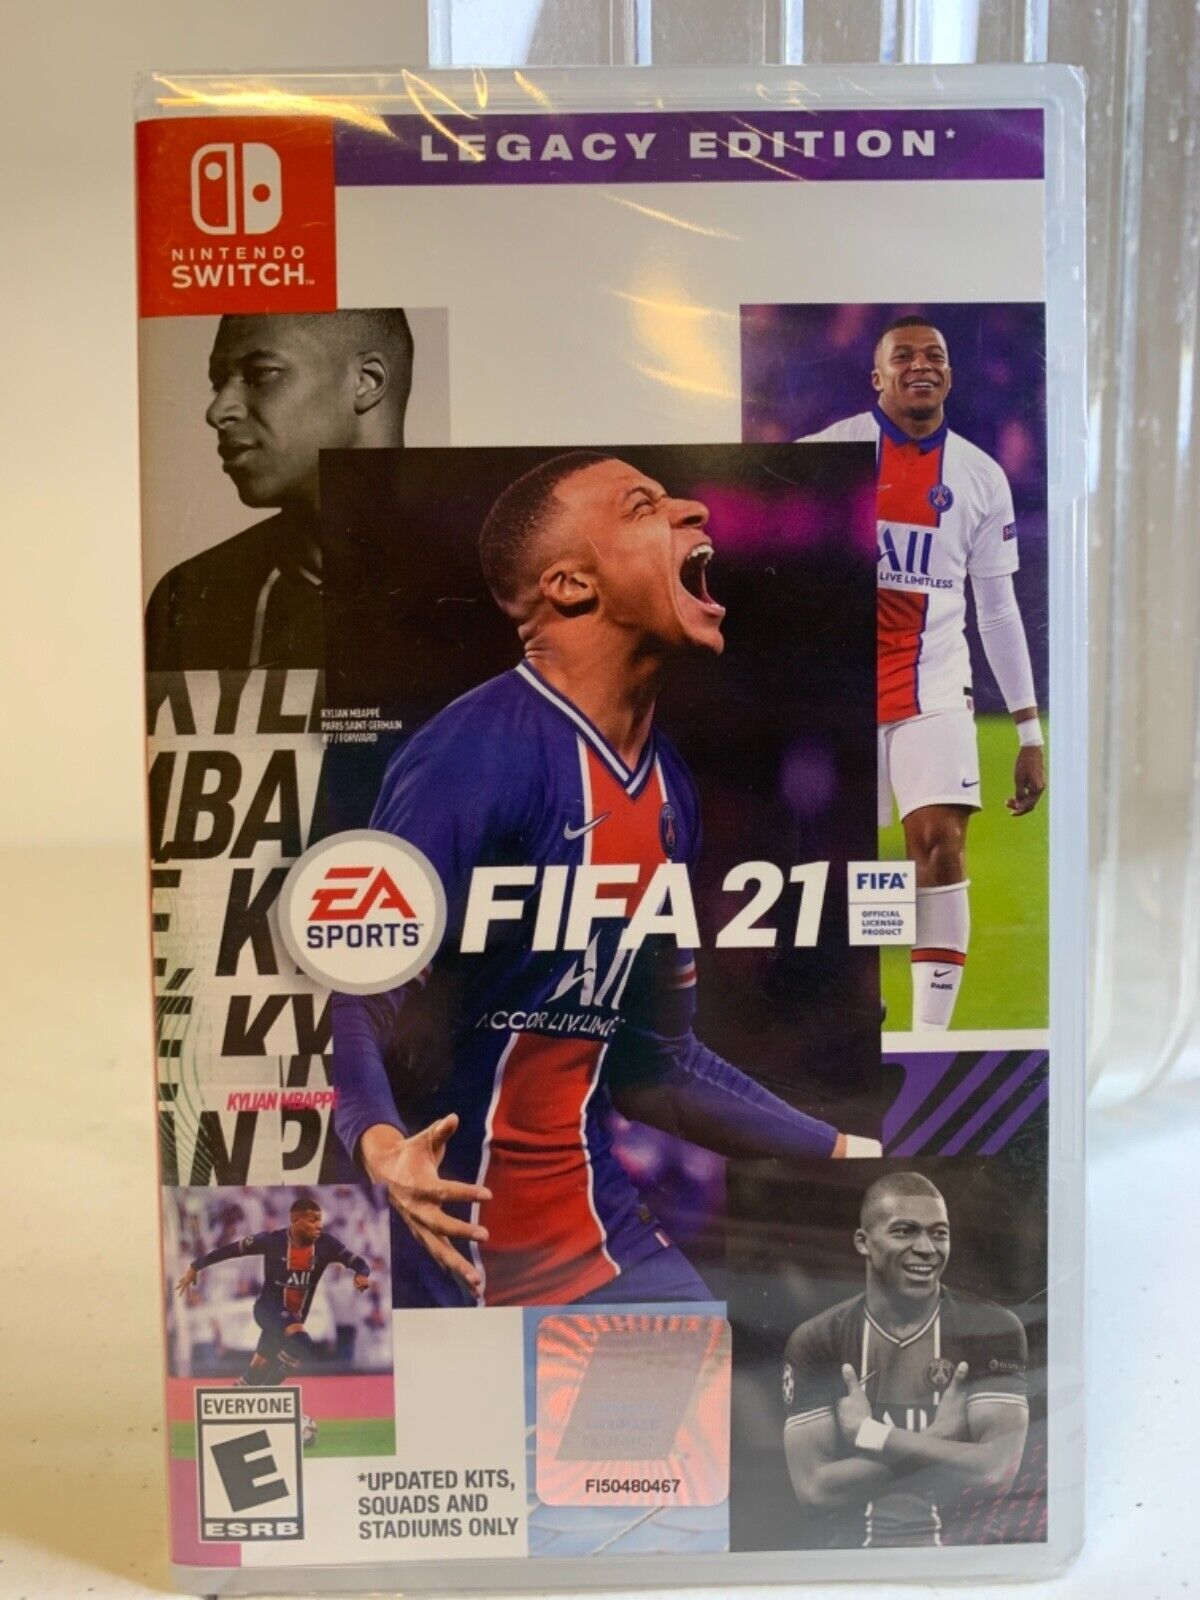 FIFA 21 Nintendo Switch 2021 Legacy Edition for Sale Final Fantasy